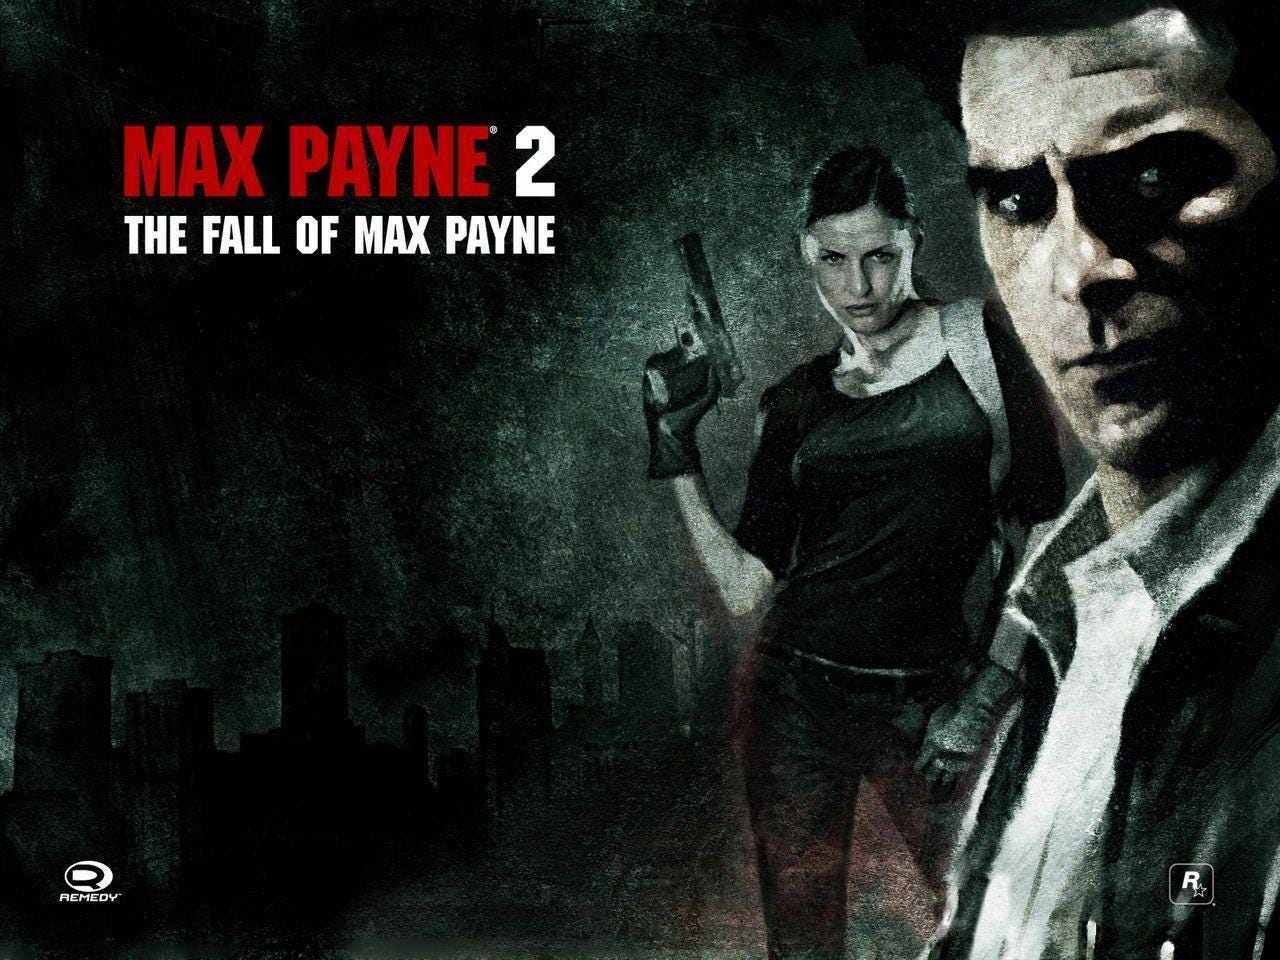 Max Payne Remake Happening — it's Fear that gives Men Wings, by Jay  (Vijayasimha BR), The Sanguine Tech Trainer